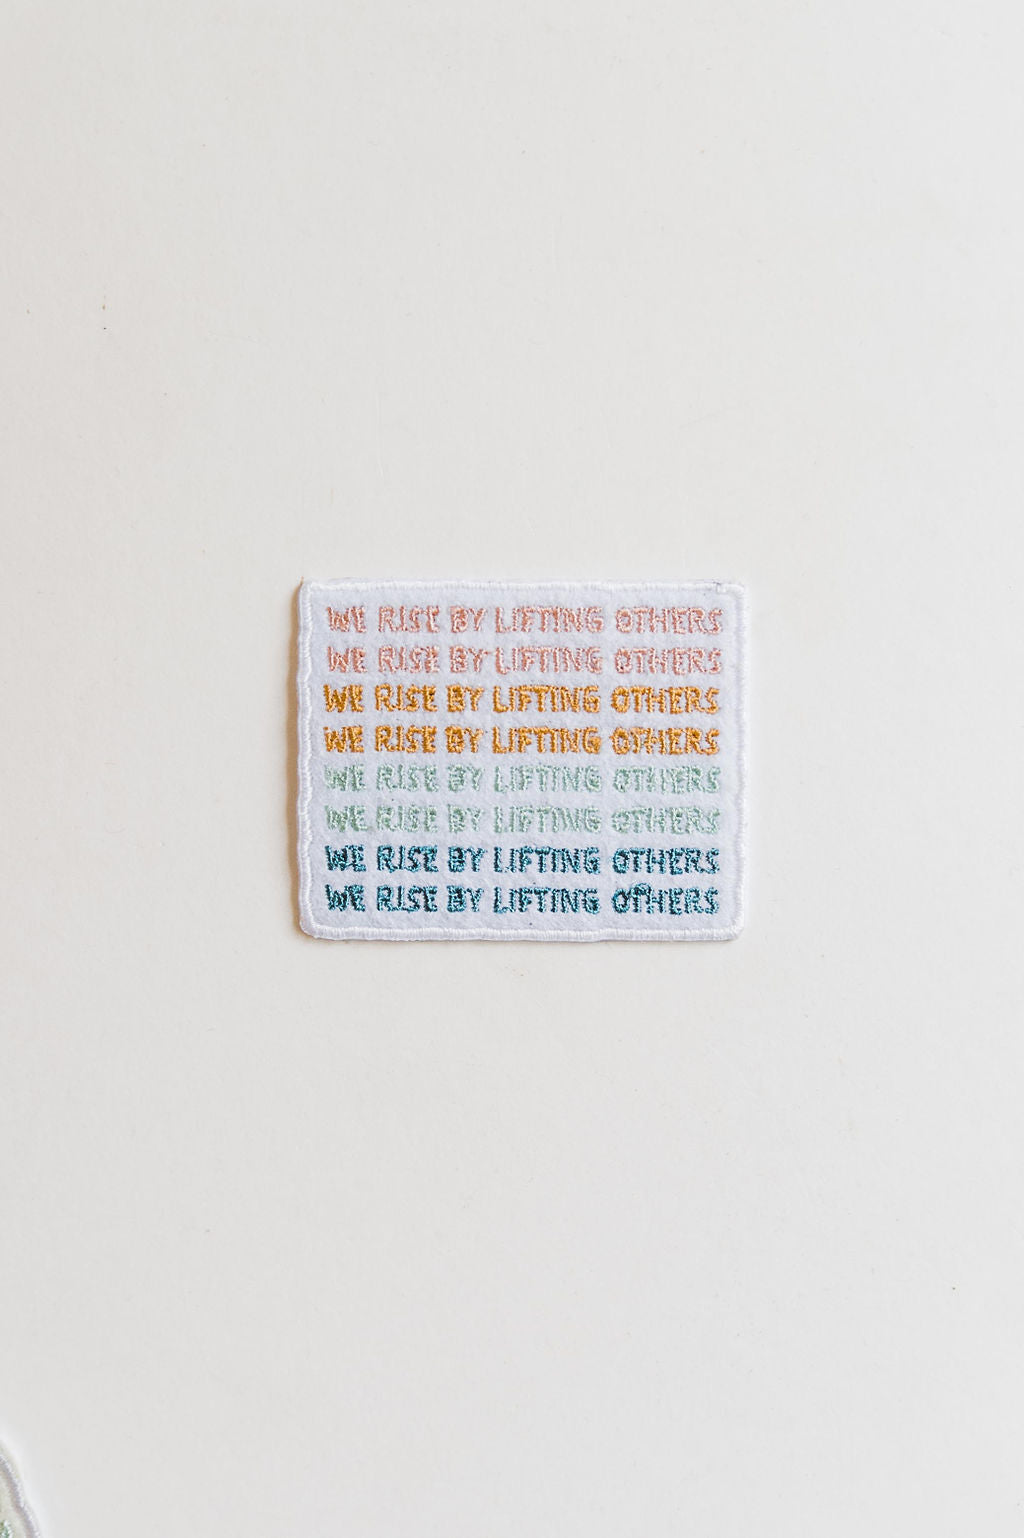 the design: we rise by lifting others the color: teal, light blue, mustard, and pink approx. 2" x 3.5" To apply: Each patch is woven with an iron on backing.   Ramble & Co. is a family owned business. Shop at shop.rambleandcompany.com or visit our store in Wichita Falls, Texas || small batch/ hand printed tees + fine art prints | your source of encouragement + inspiration.